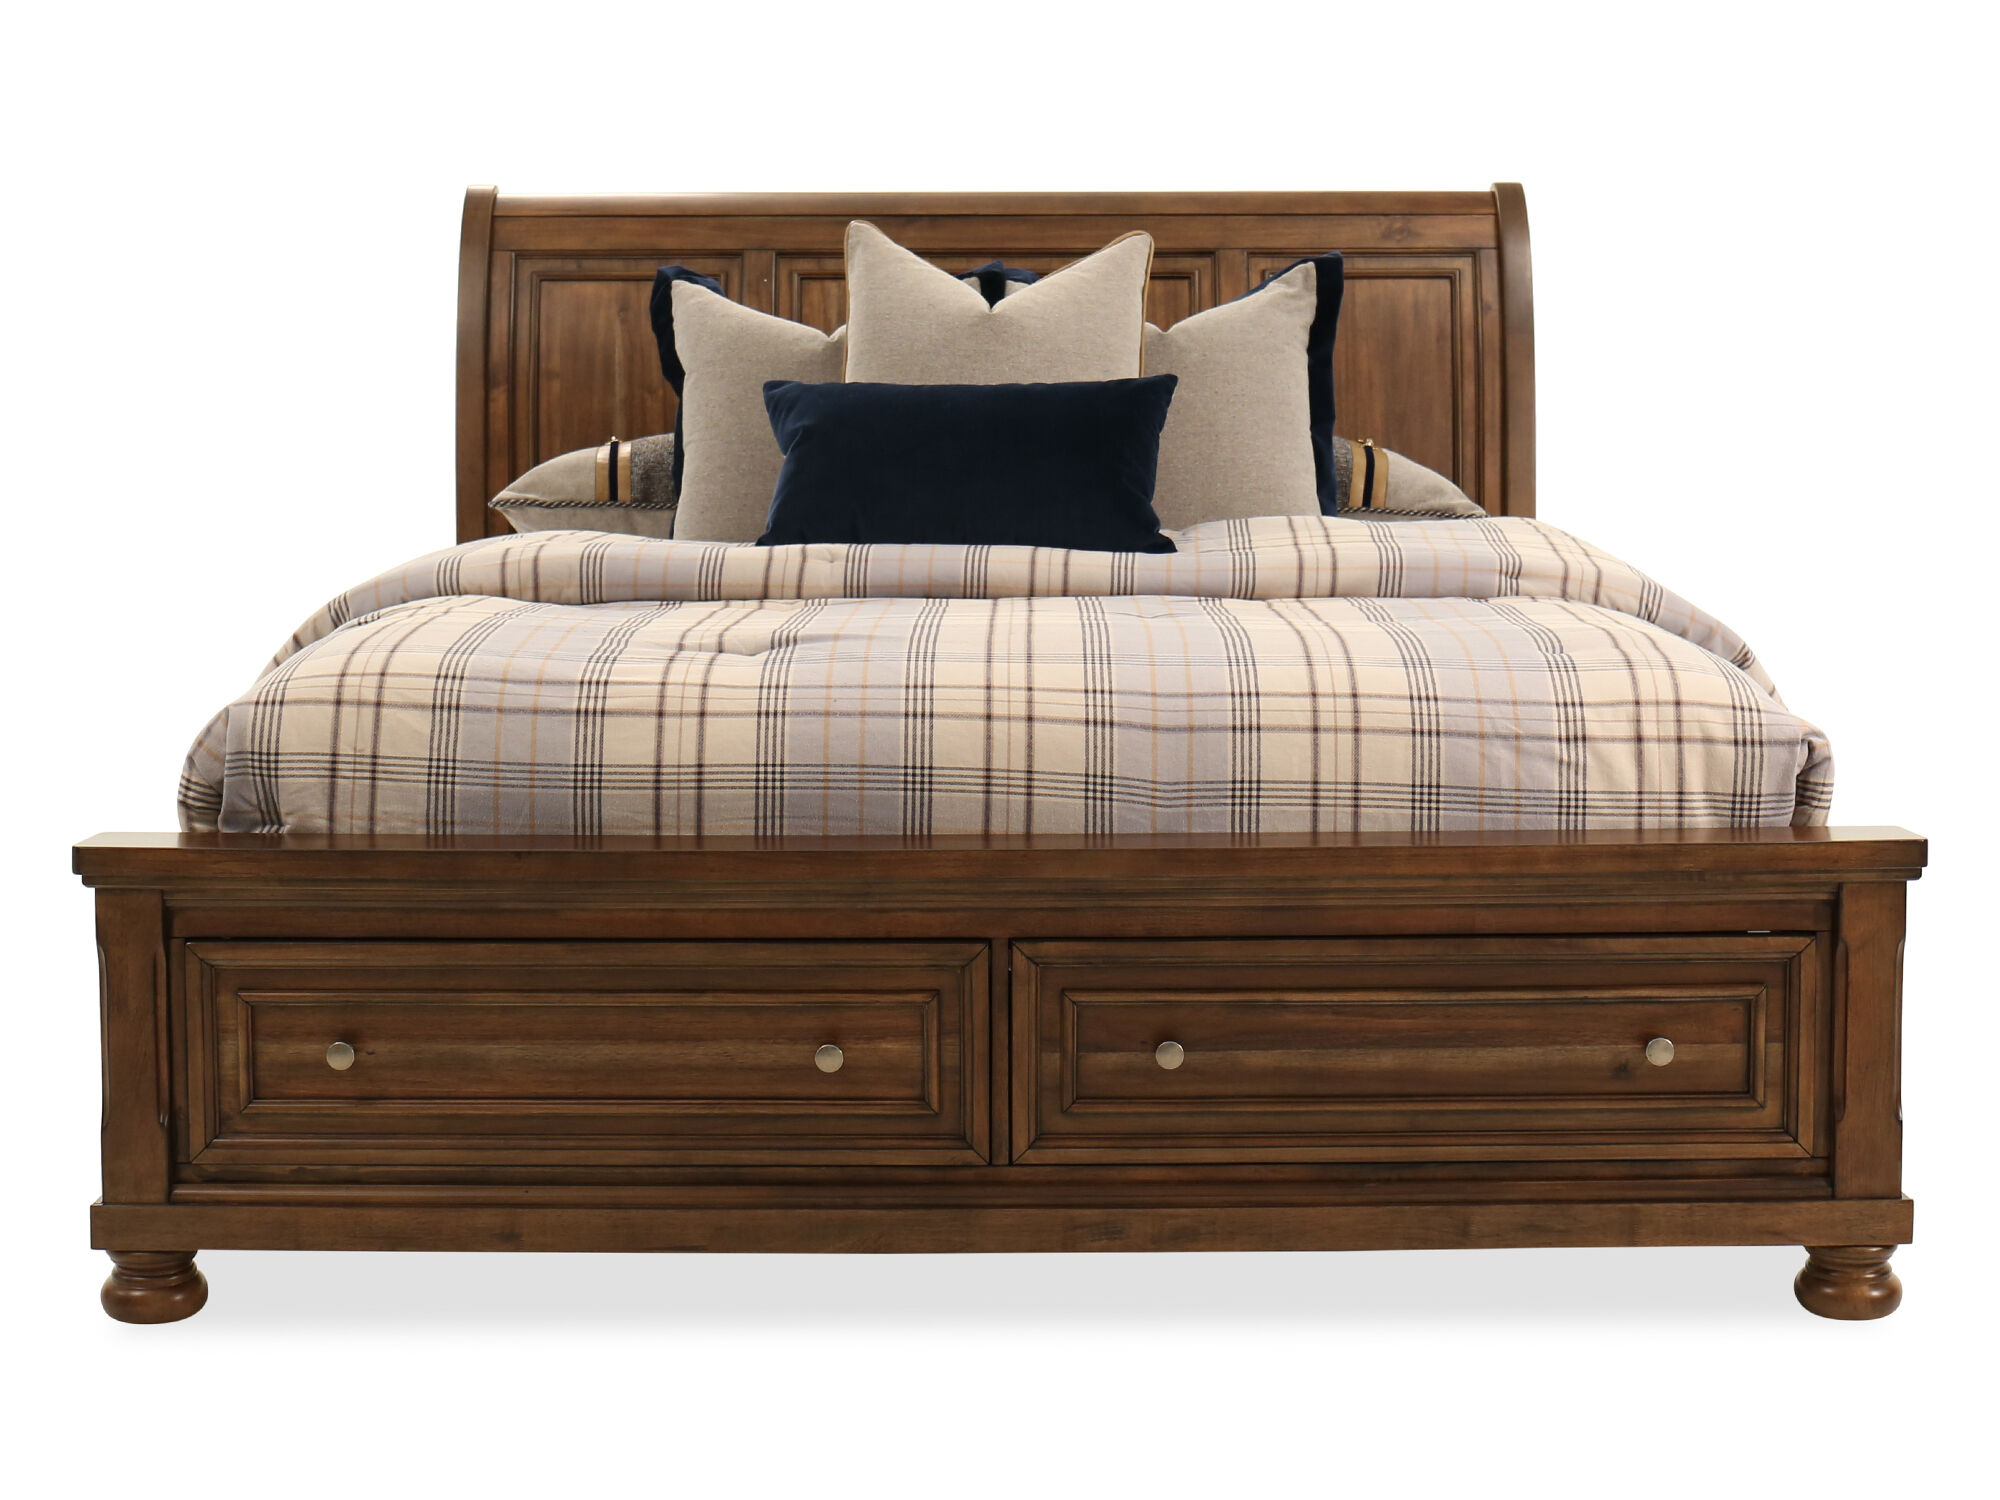 57 Transitional Paneled Sleigh Storage, Townser King Sleigh Bed